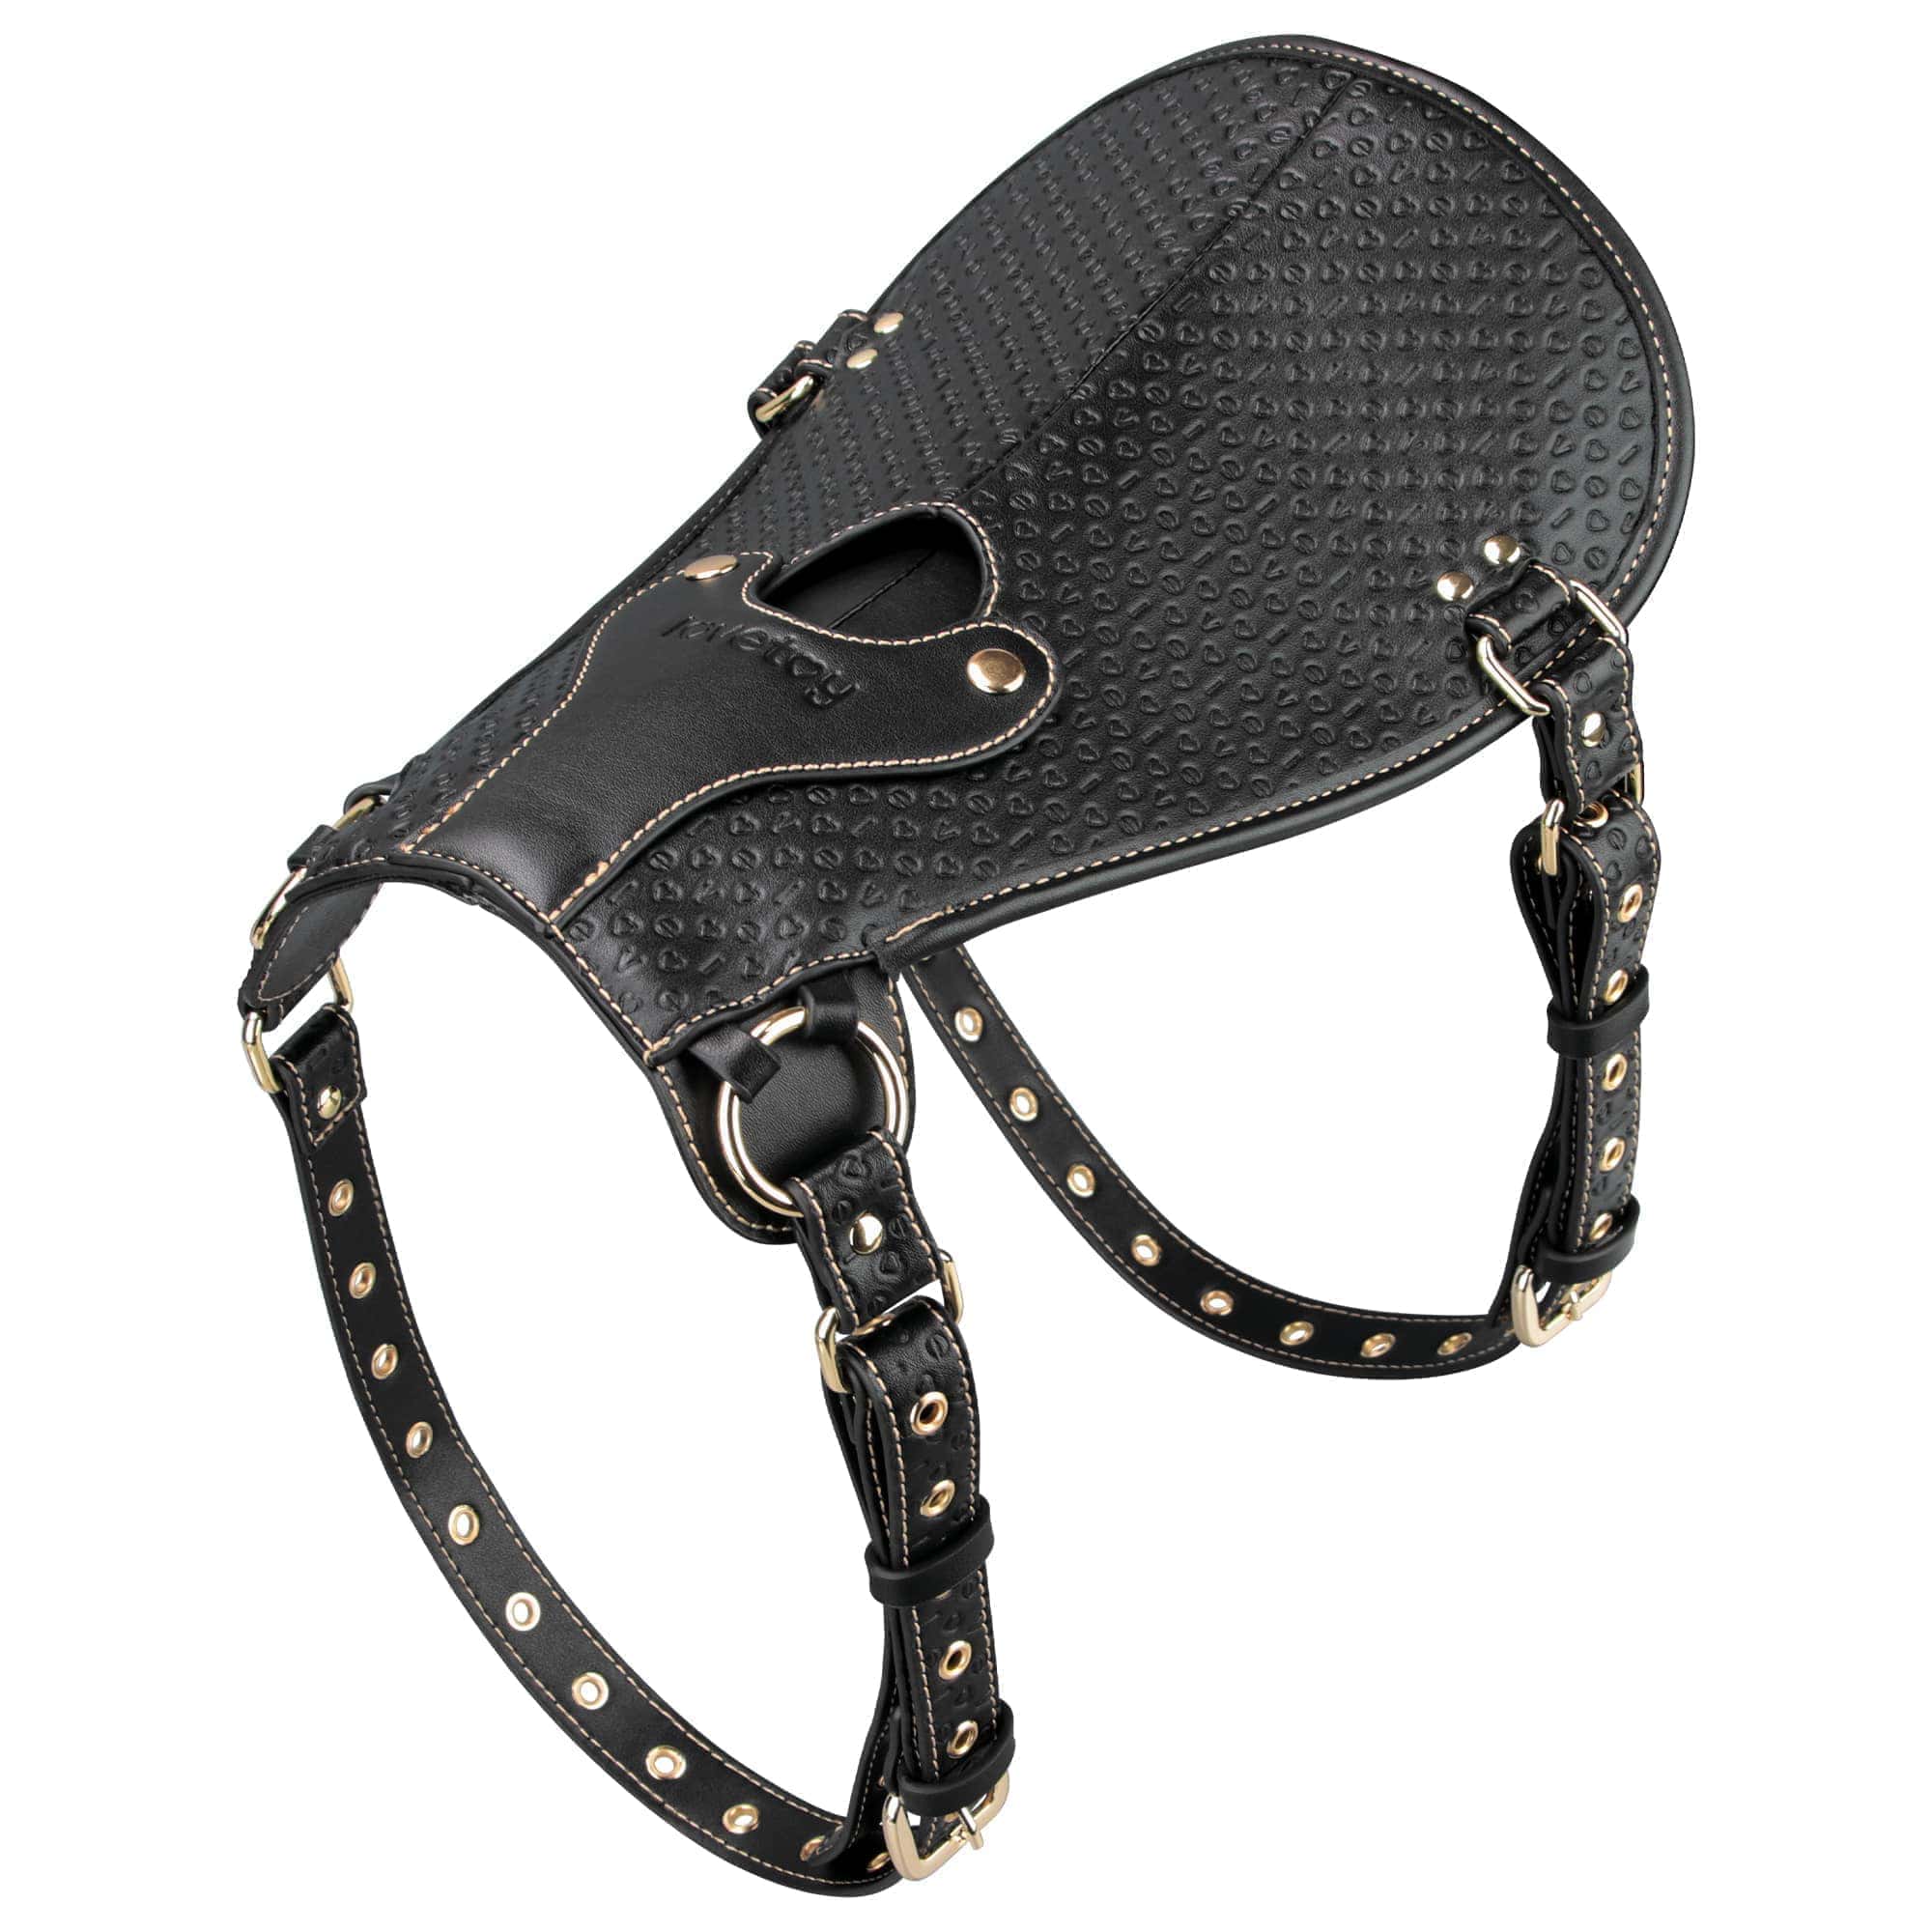 The adjustable buckle straps of the rebellion reign dildo saddle